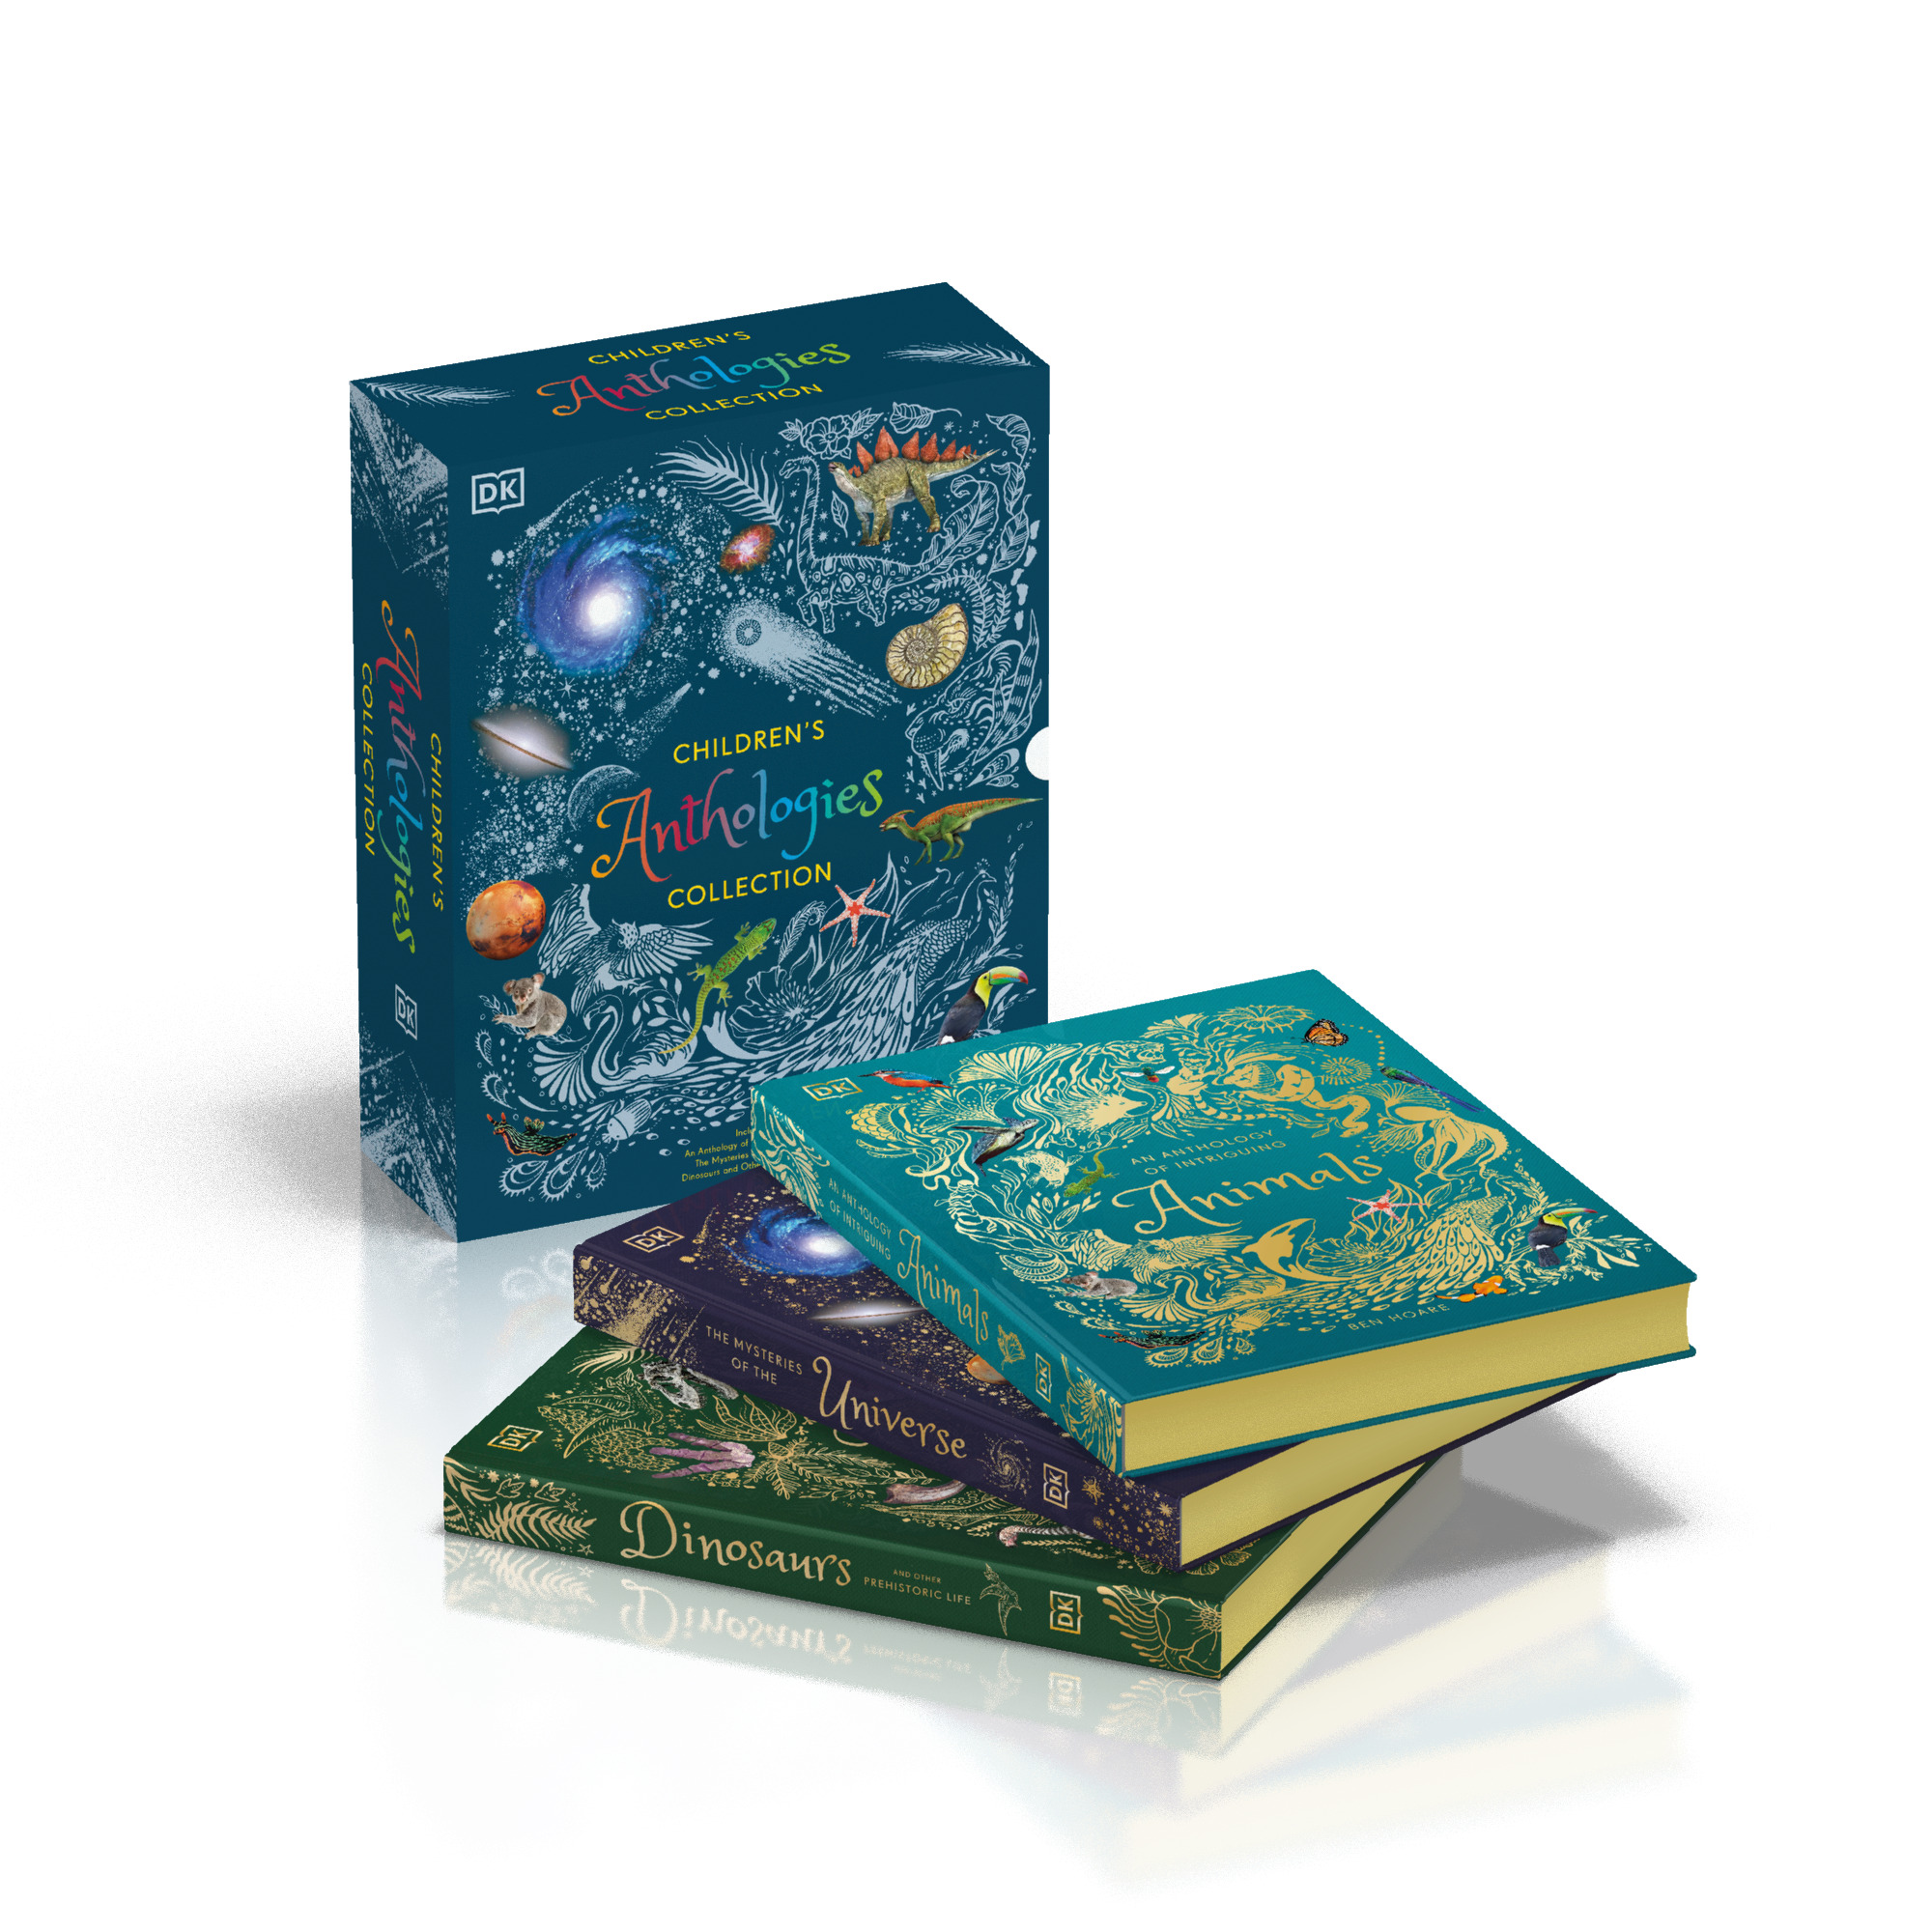 Children's Anthologies Collection : 3-Book Box Set for Kids Ages 6-8, Featuring 300+ Animal, Dinosaur, and Space Topics | Chinsamy-Turan, Anusuya (Auteur) | Hoare, Ben (Auteur) | Gater, Will (Auteur)